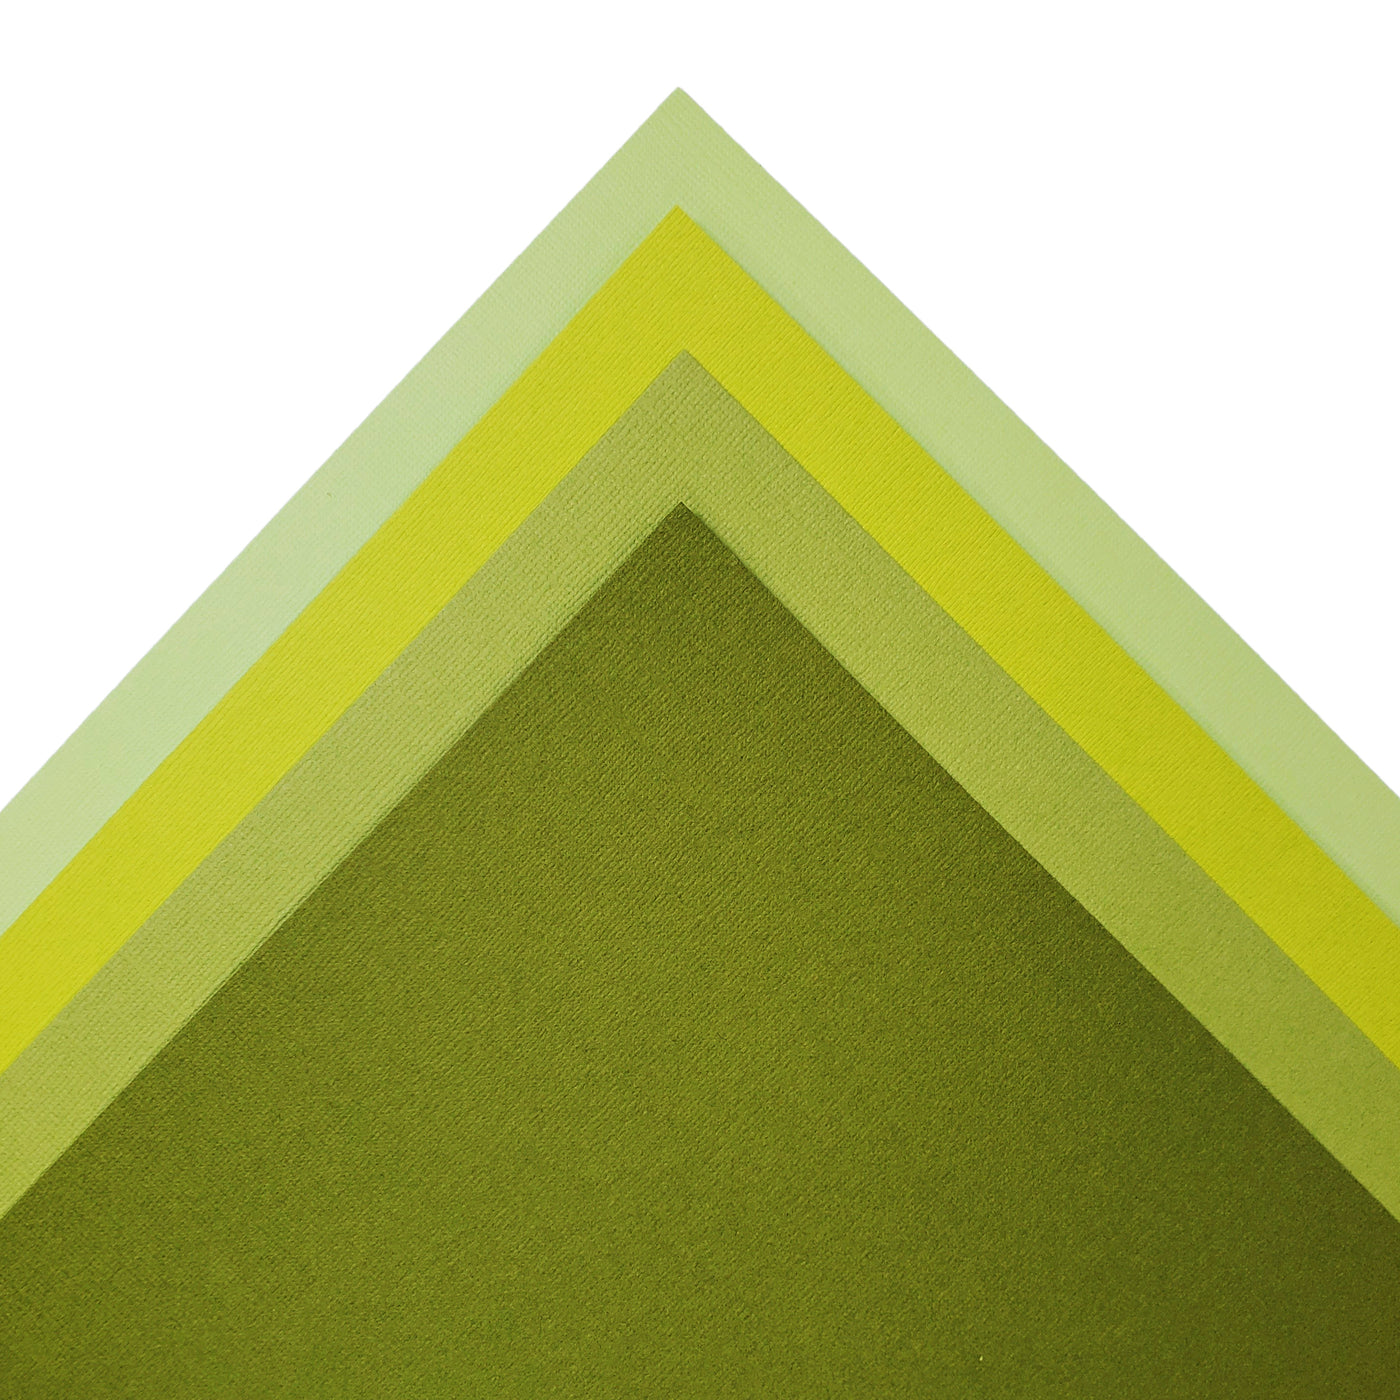 Bazzill Monochromatic pack : Lime Green Bazzill cardstock in four complementary shades.